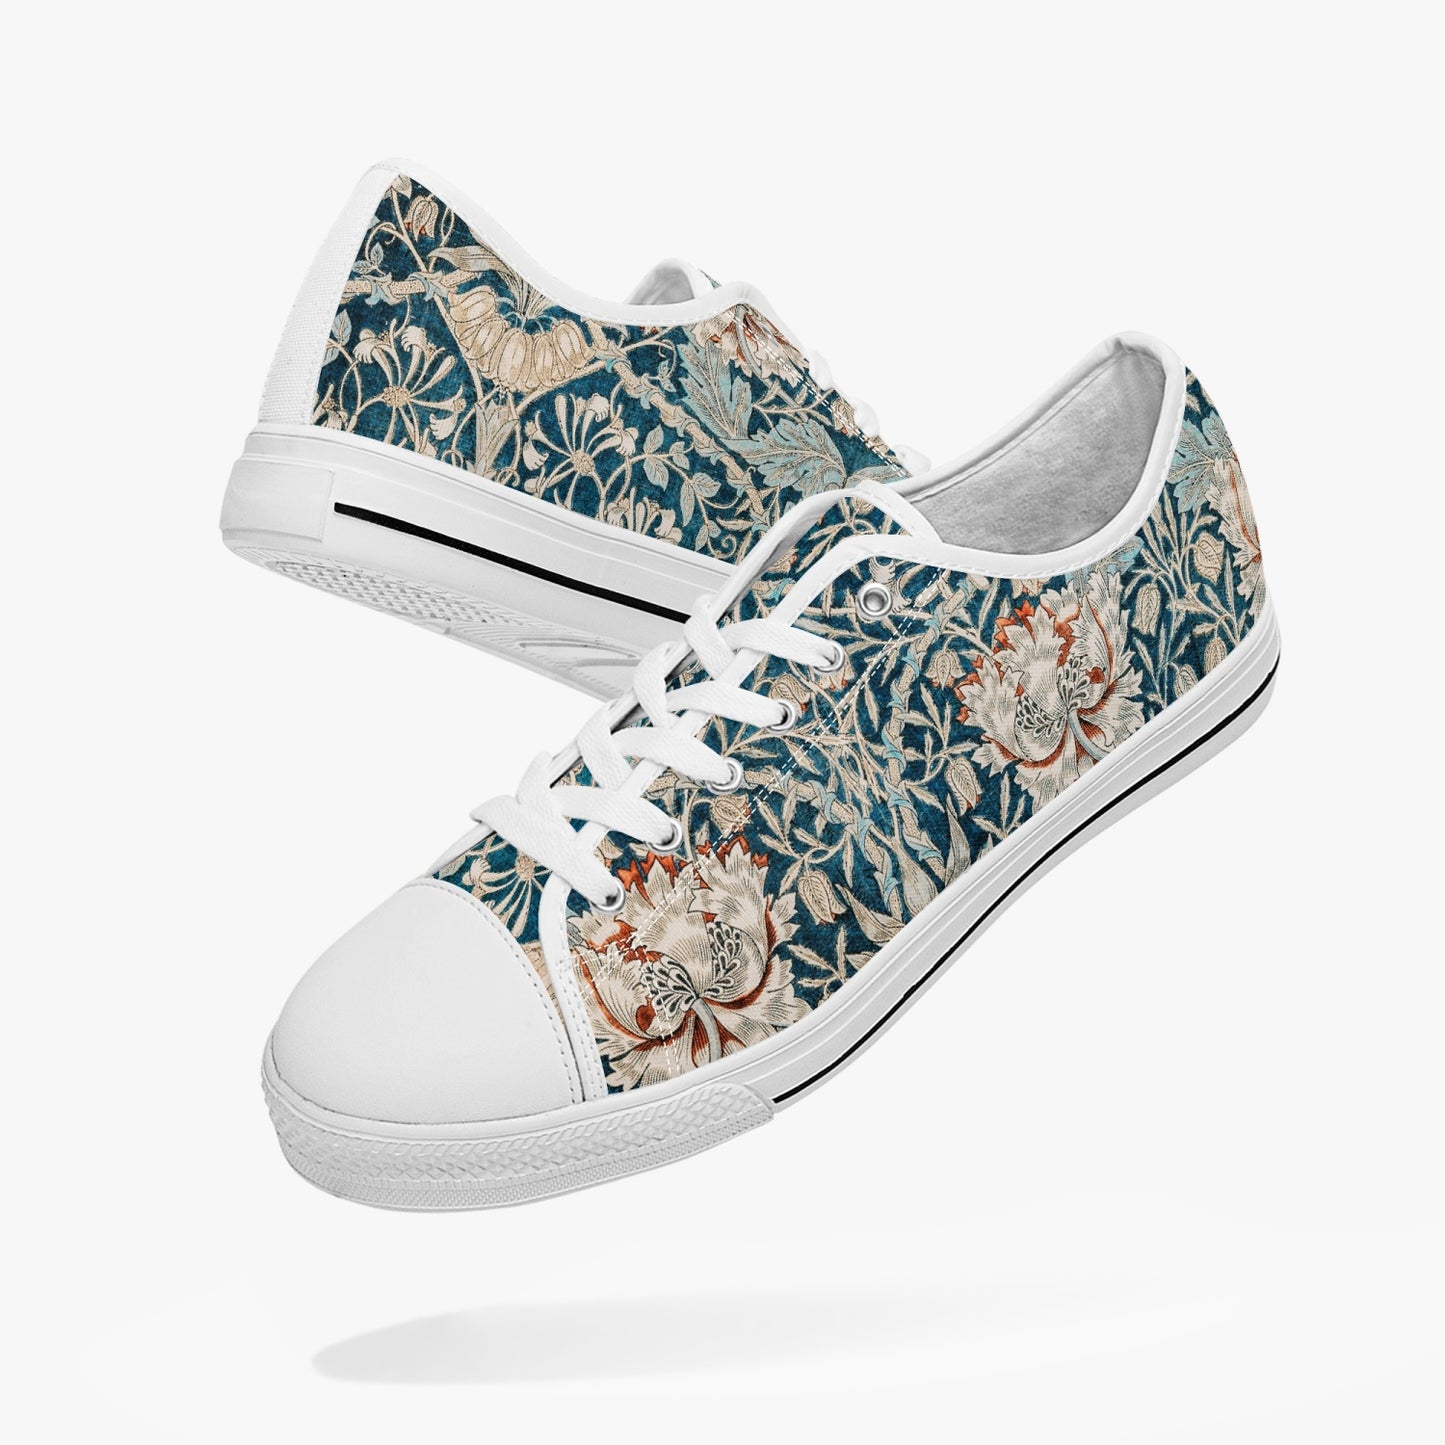 Flowered Sneakers: Canvas Low-Tops with Hyacinth William Morris Wallpaper Design